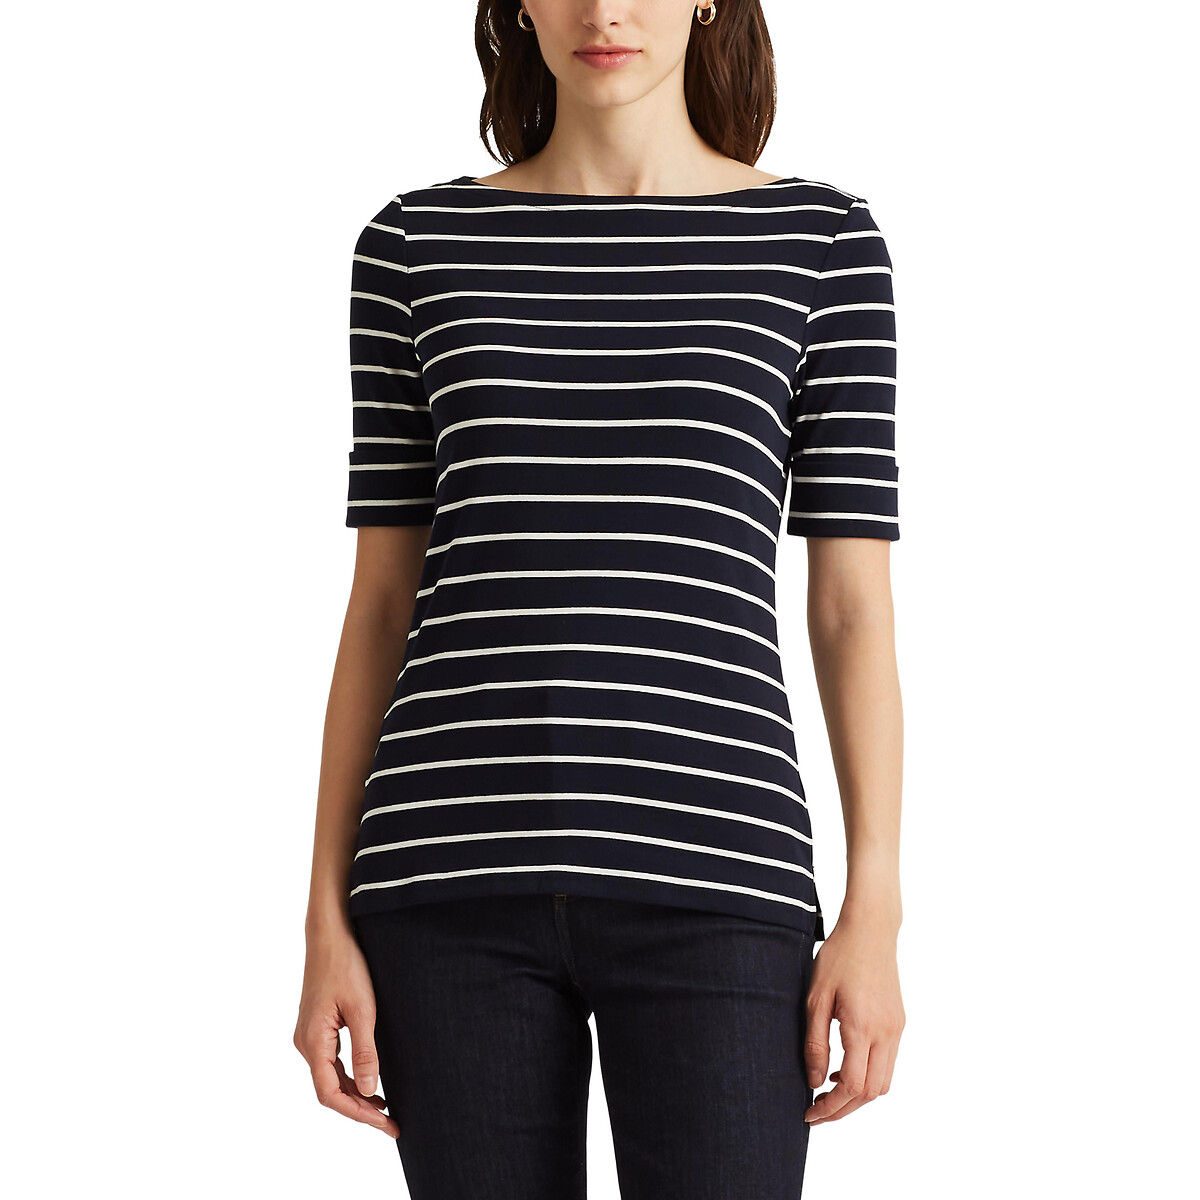 Striped Boat Neck T-Shirt with Short Sleeves in Cotton